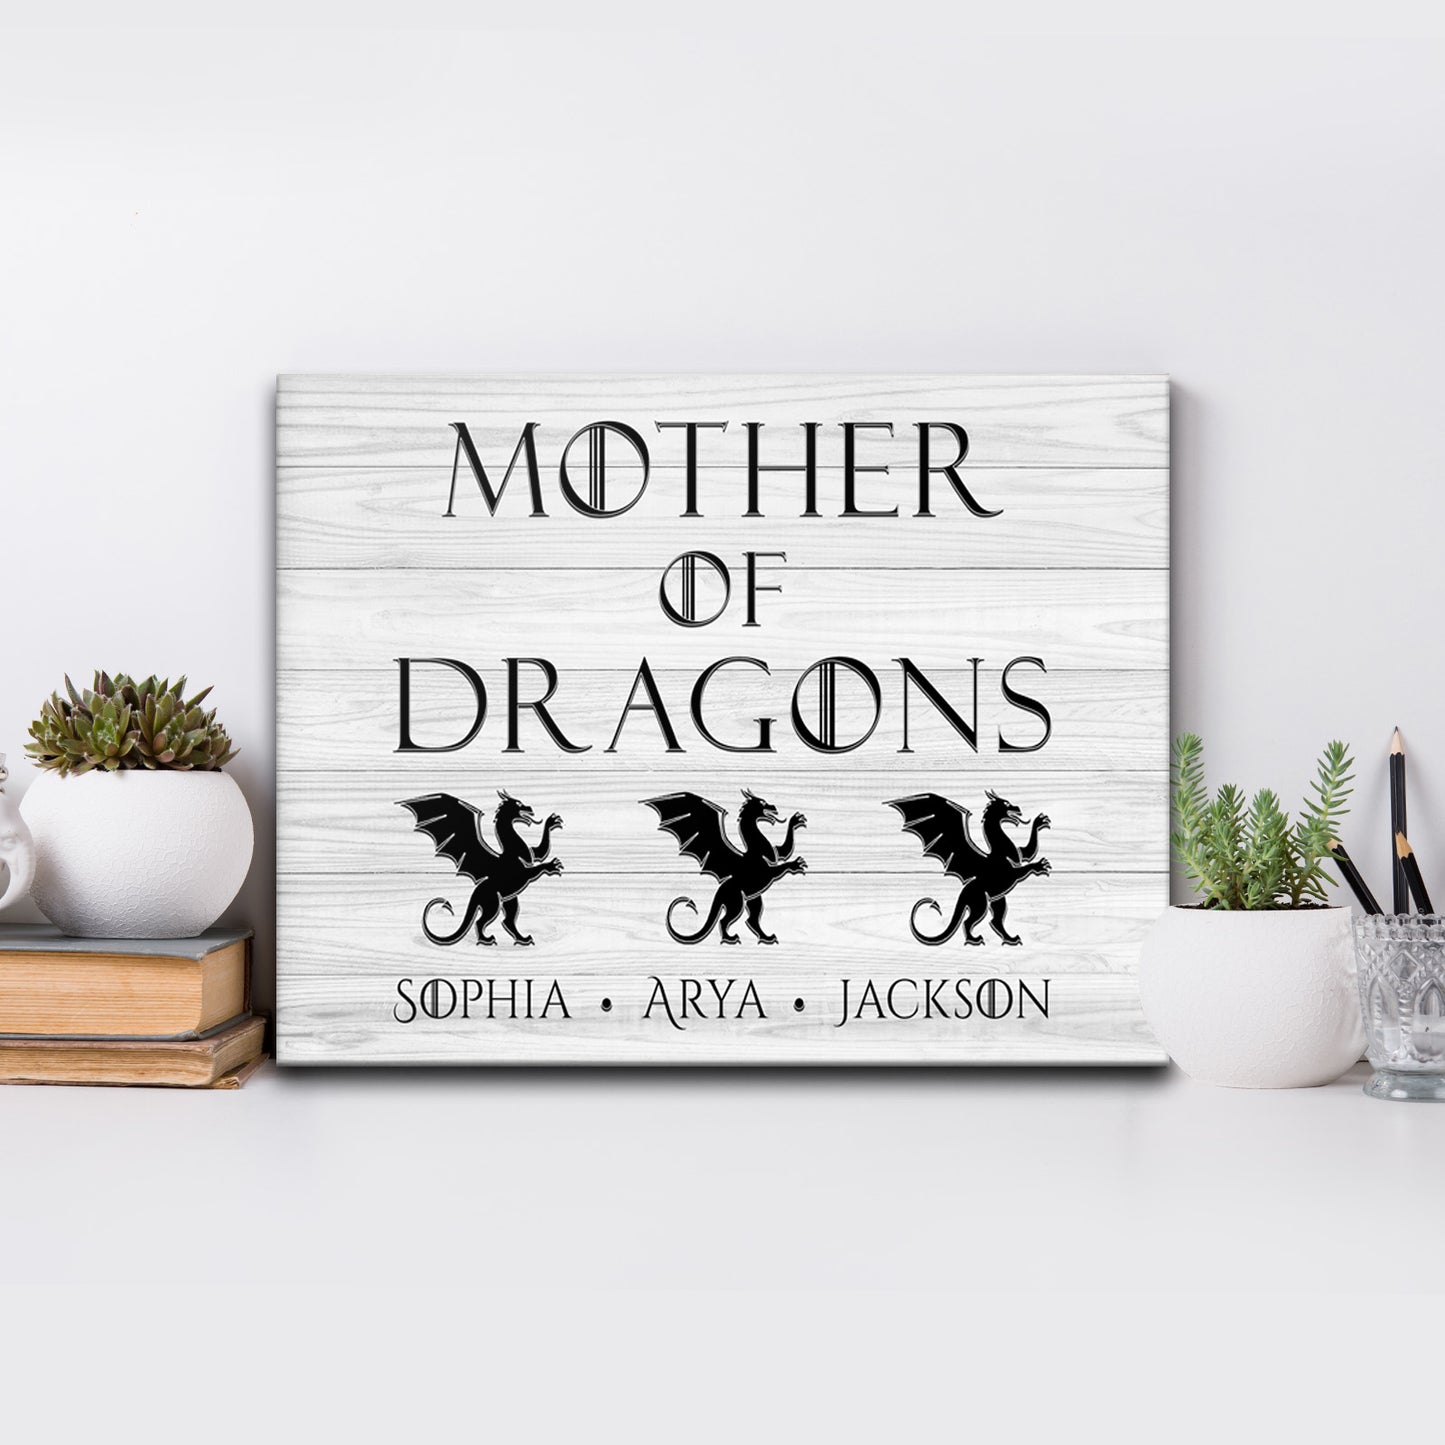 Mother of Dragons Sign - Image by Tailored Canvases